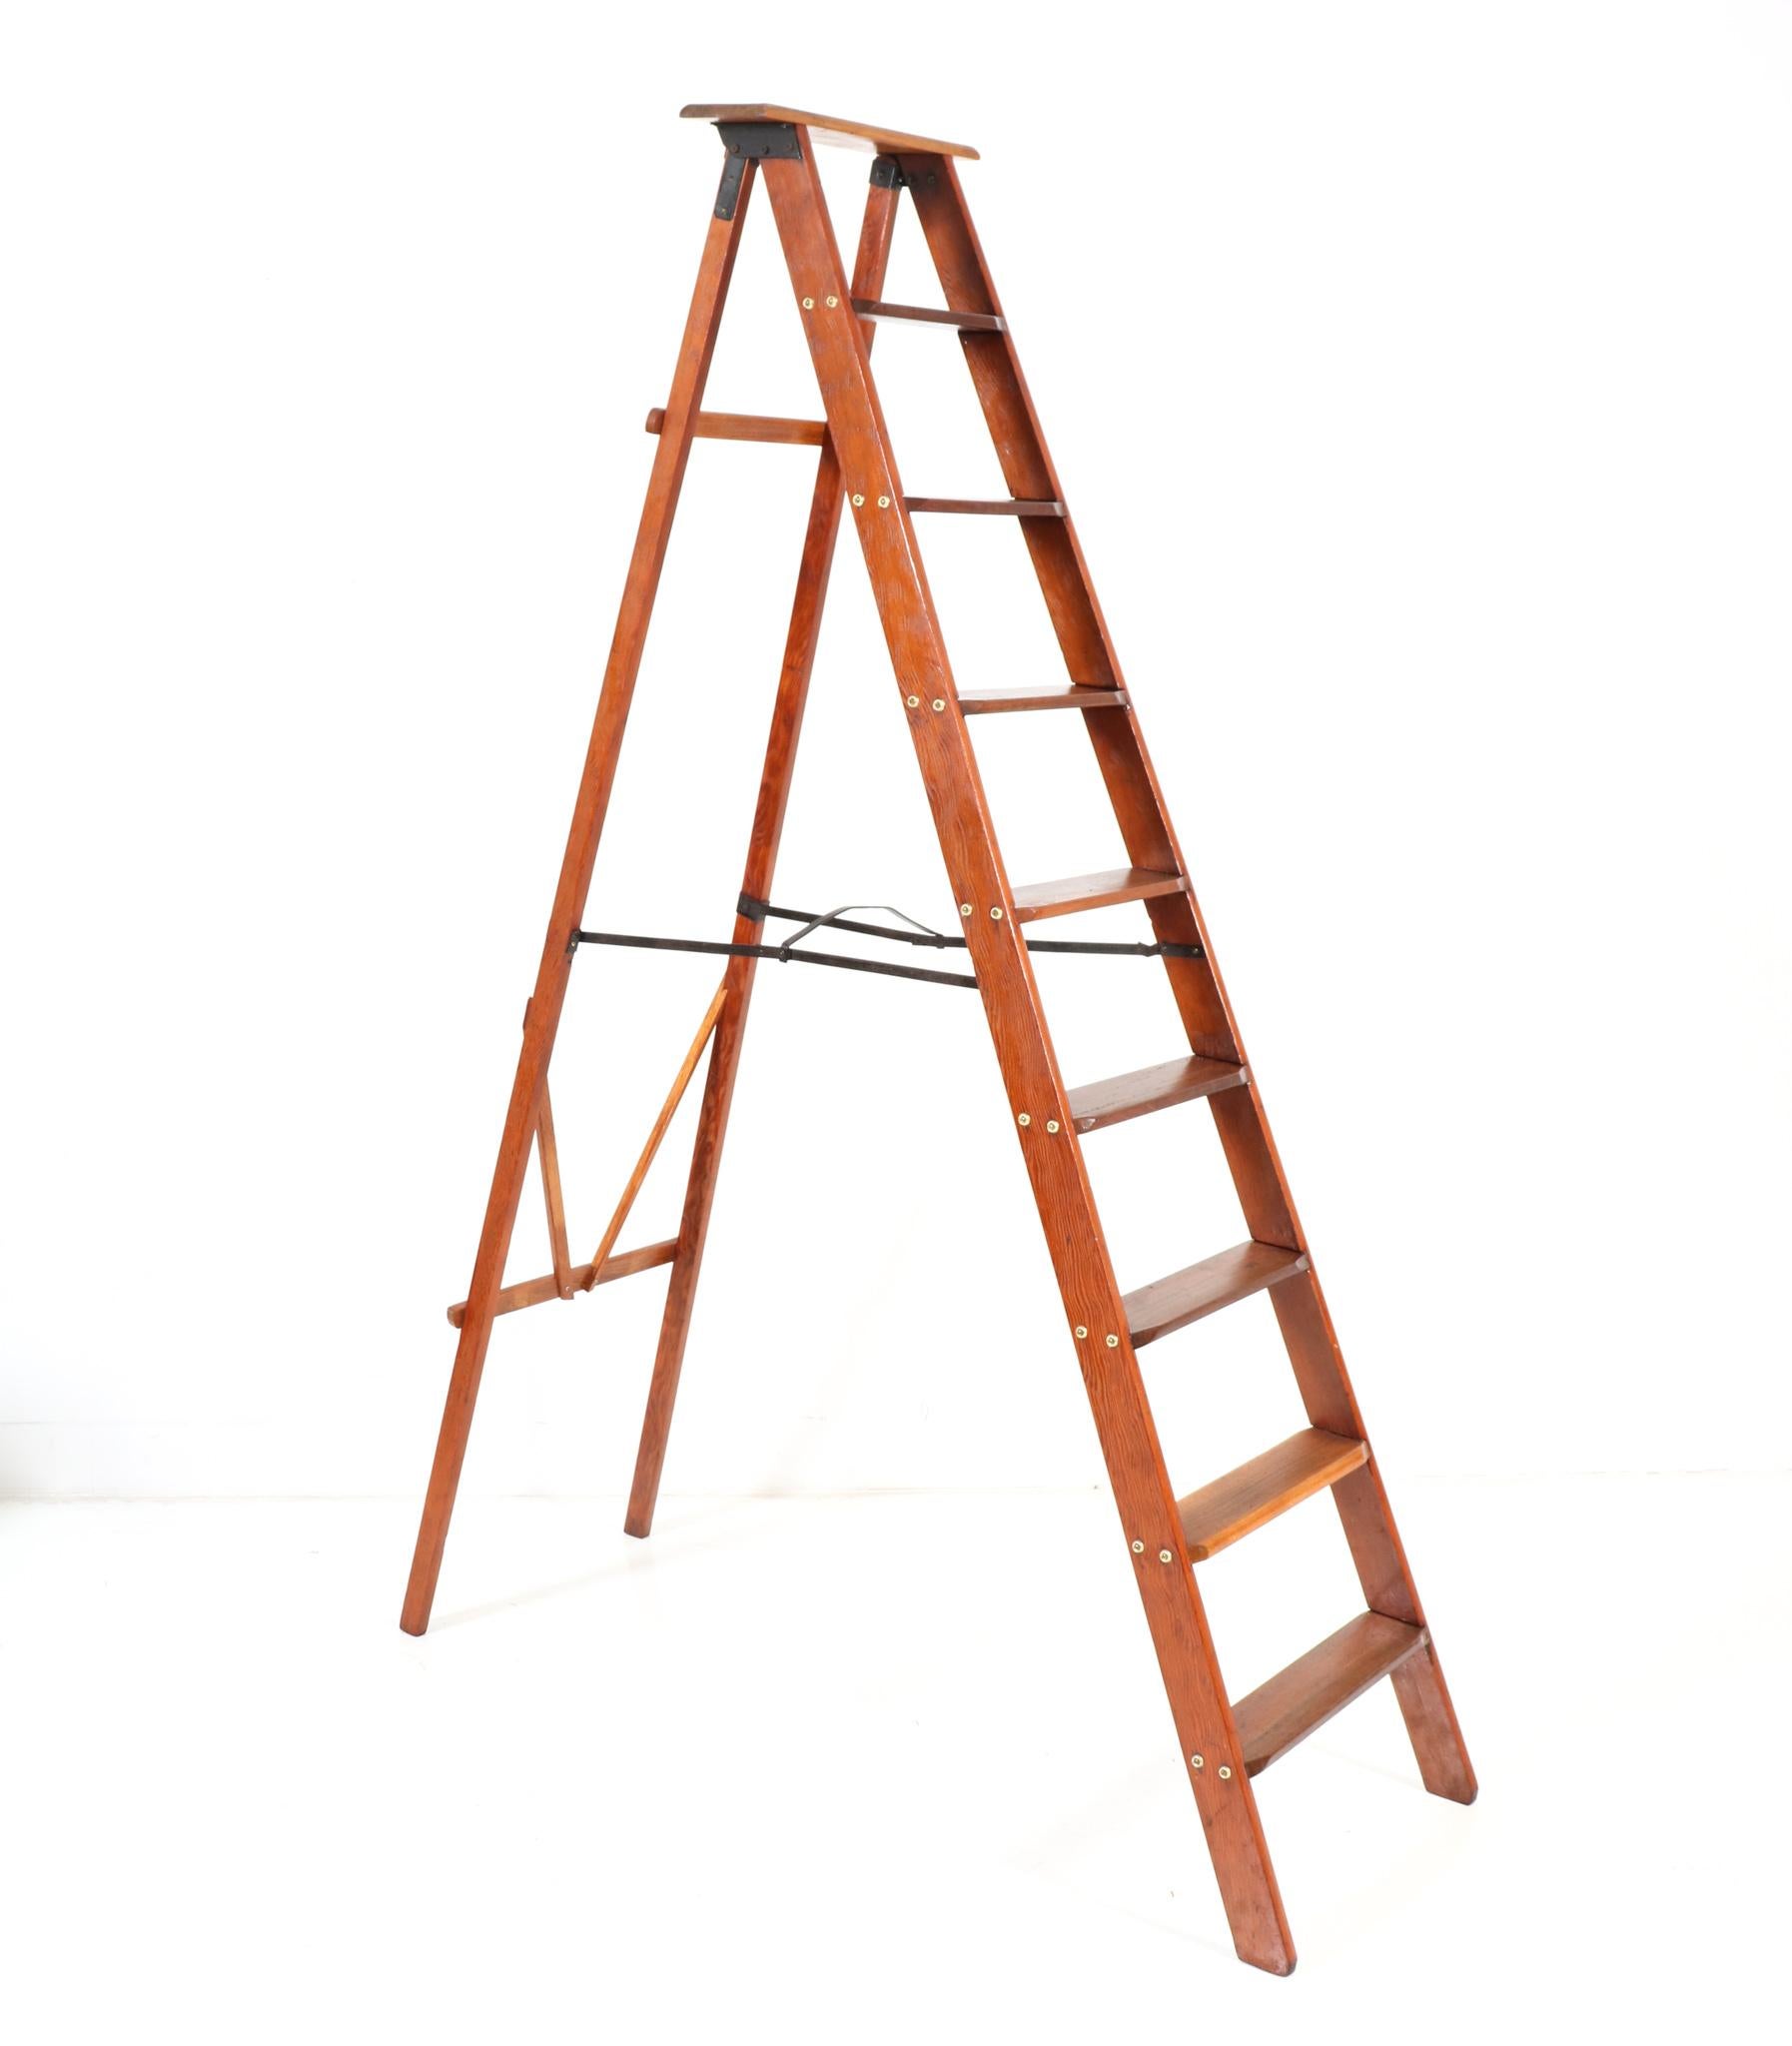 Stunning and rare Art Deco library nine steps ladder.
Striking Dutch design from the 1920s.
Solid pitch pine with black lacquered metal supports and brass screws.
This wonderful Art Deco library steps or ladder is foldable so easy to